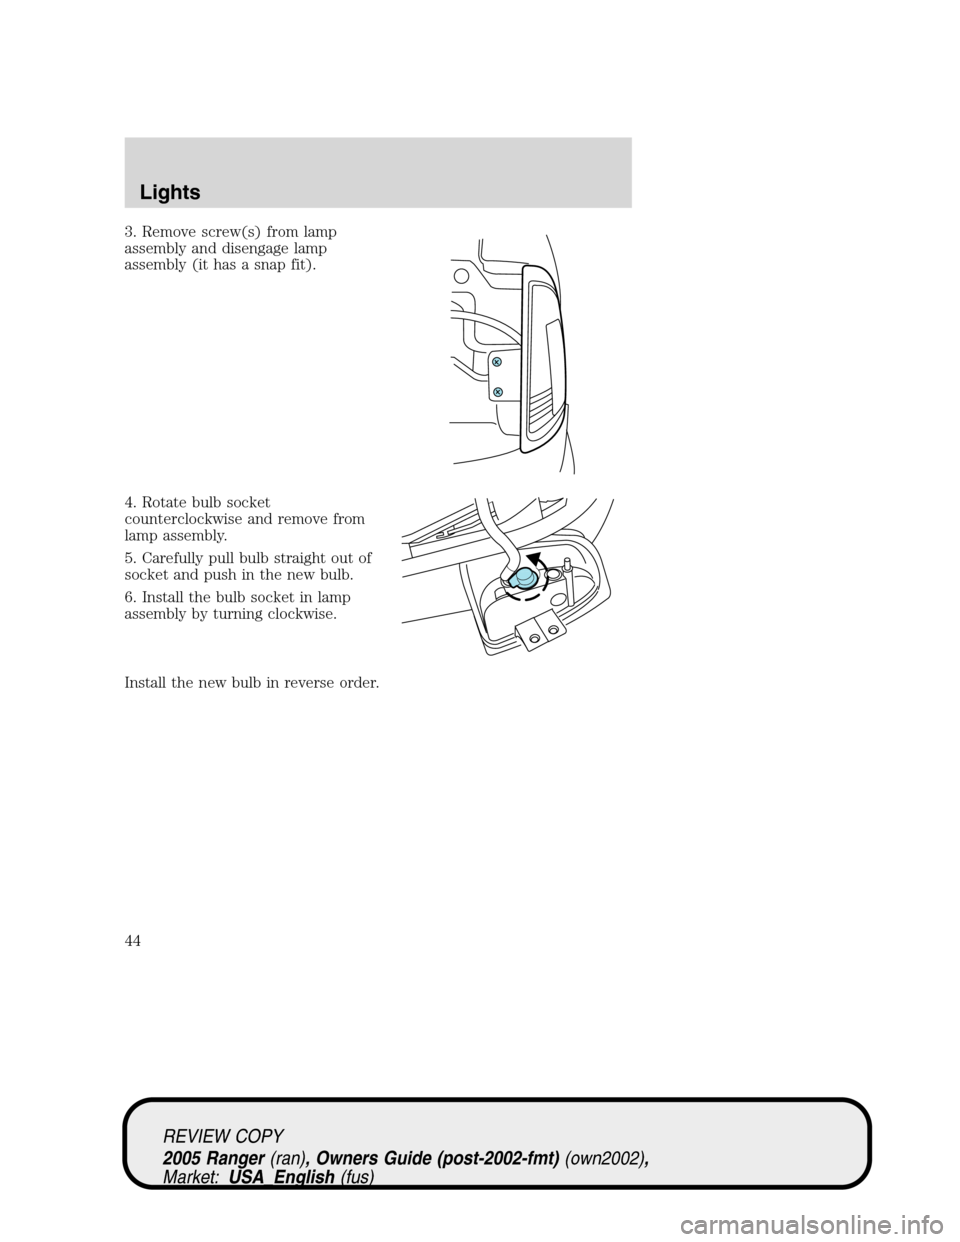 FORD RANGER 2005 2.G Owners Manual 3. Remove screw(s) from lamp
assembly and disengage lamp
assembly (it has a snap fit).
4. Rotate bulb socket
counterclockwise and remove from
lamp assembly.
5. Carefully pull bulb straight out of
sock